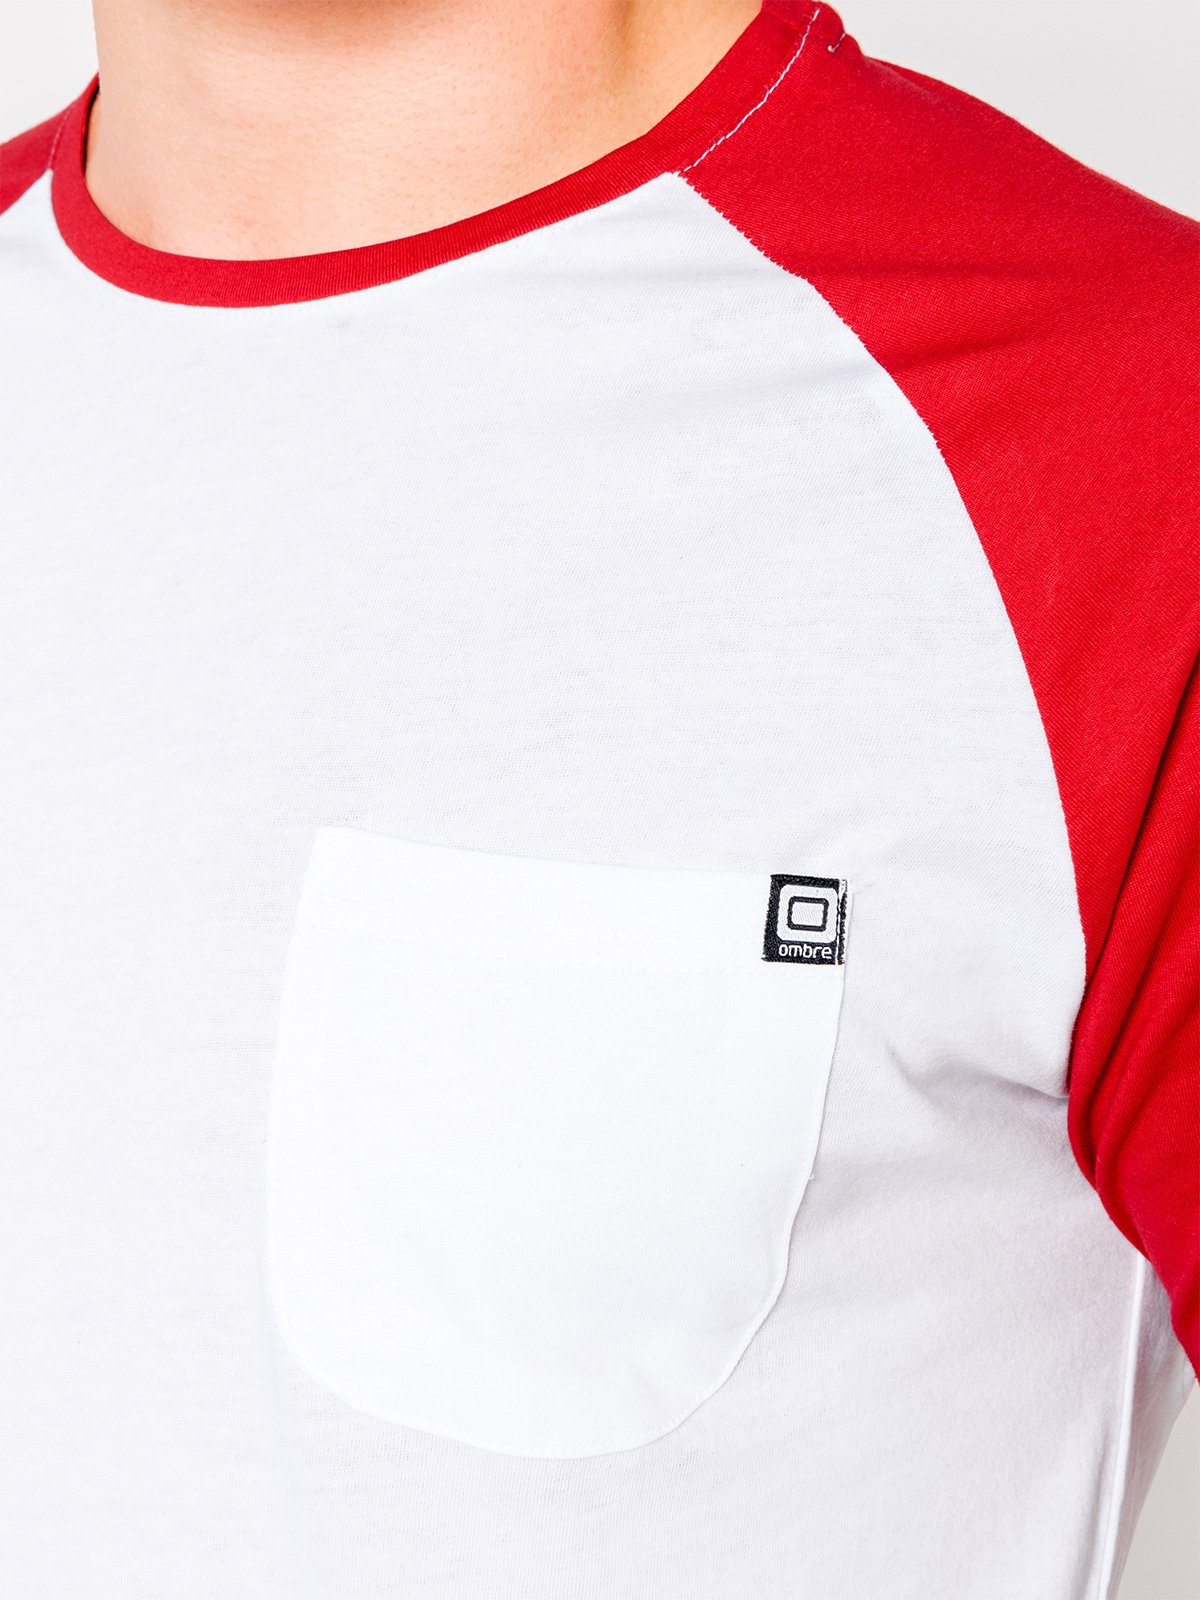 Buy > white with red shirt > in stock